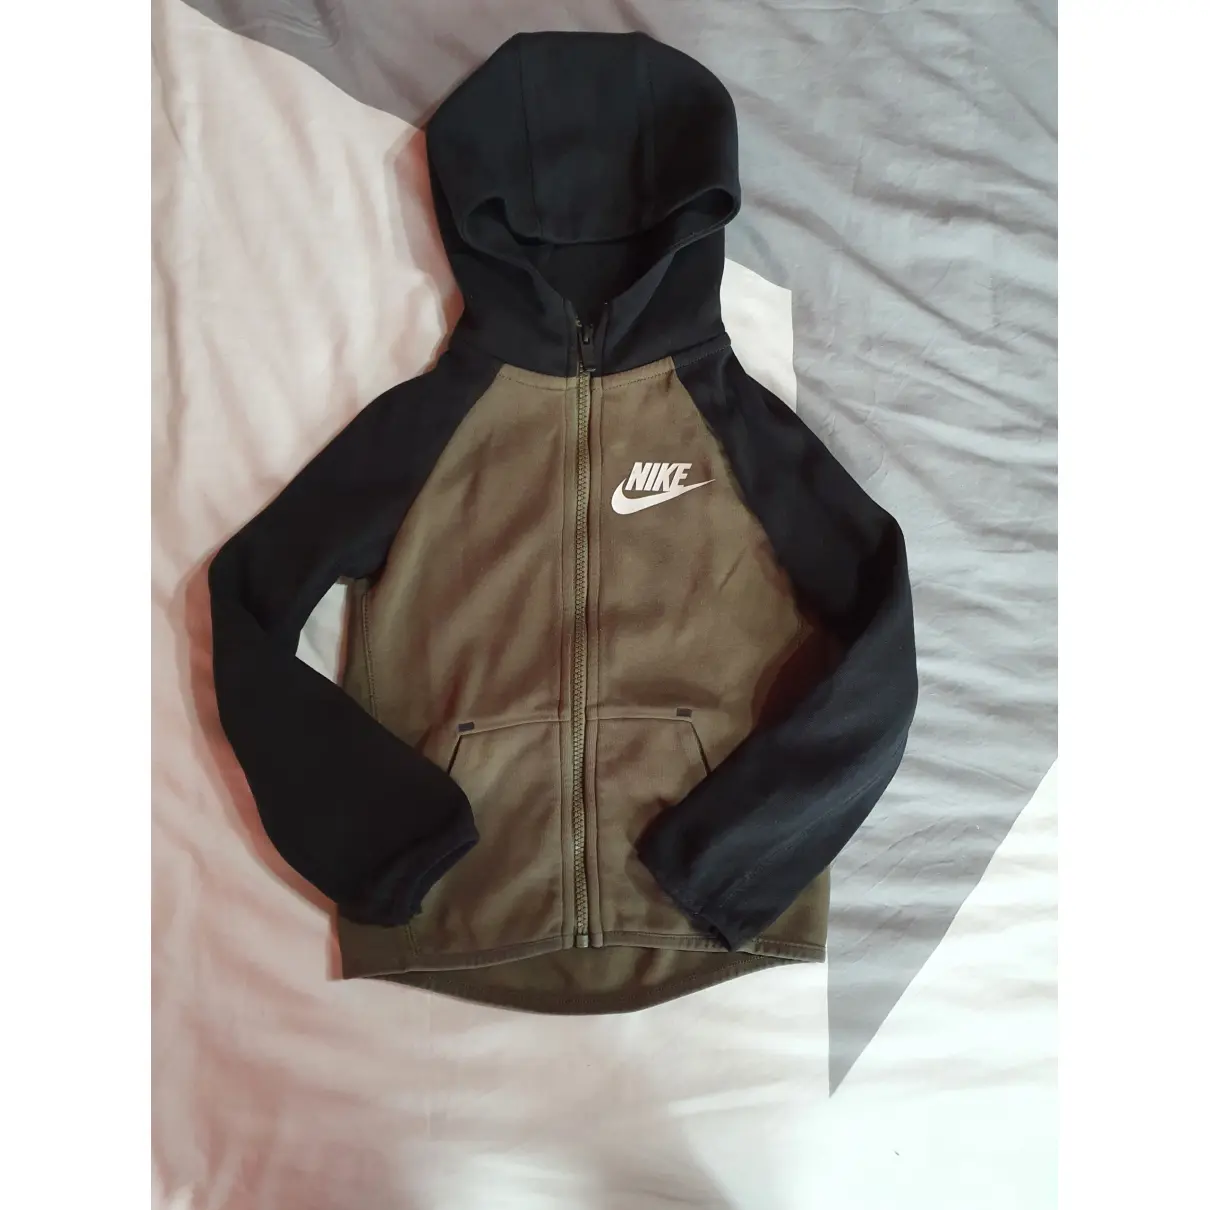 Buy Nike Outfit online